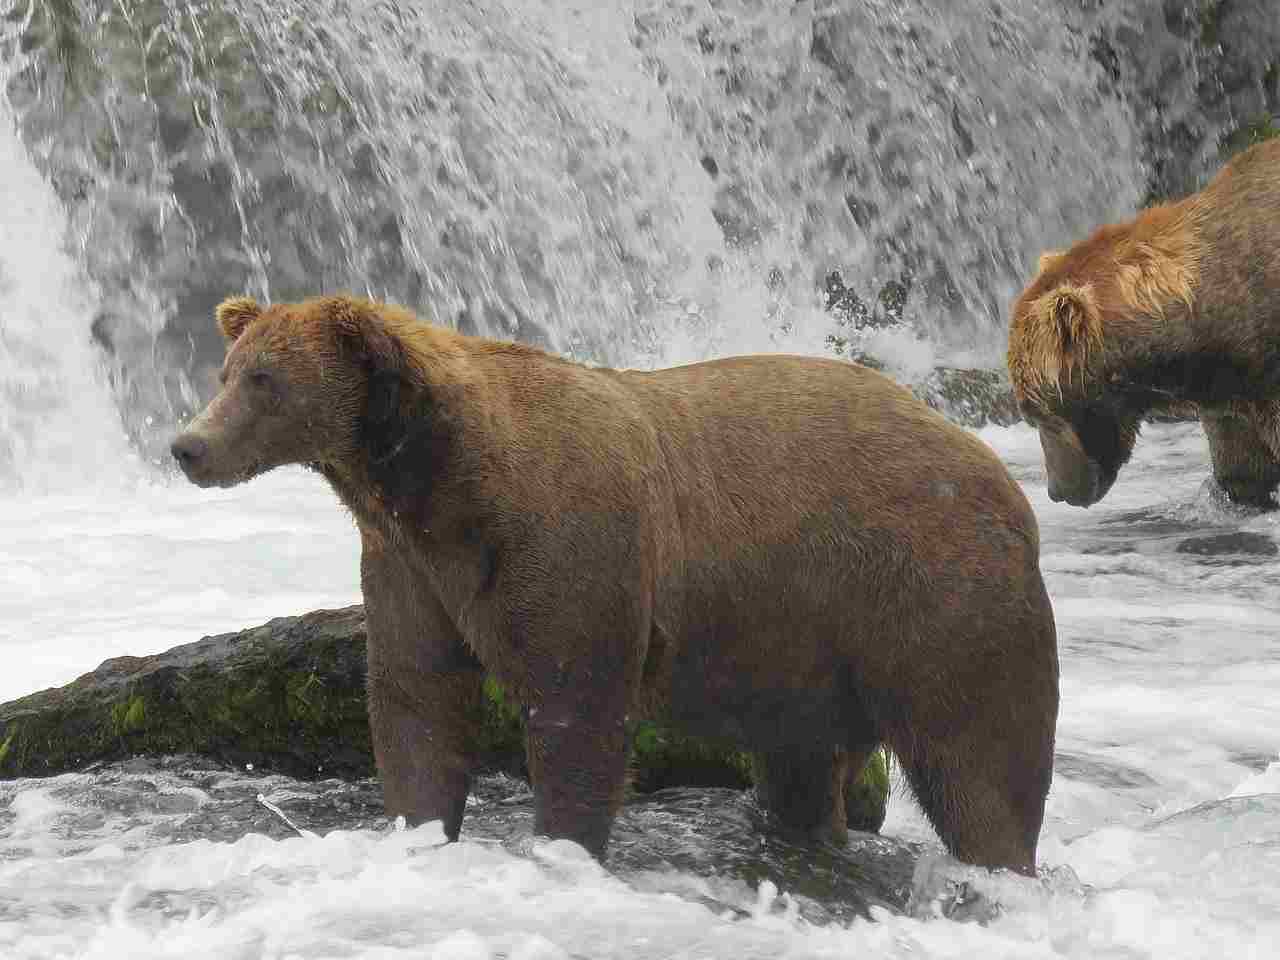 Mountain Lion Vs Bear: The Size, Weight and Strength of Bears Give Them An Edge Over Mountain Lions (Credit: Katmai National Park and Preserve 2019)